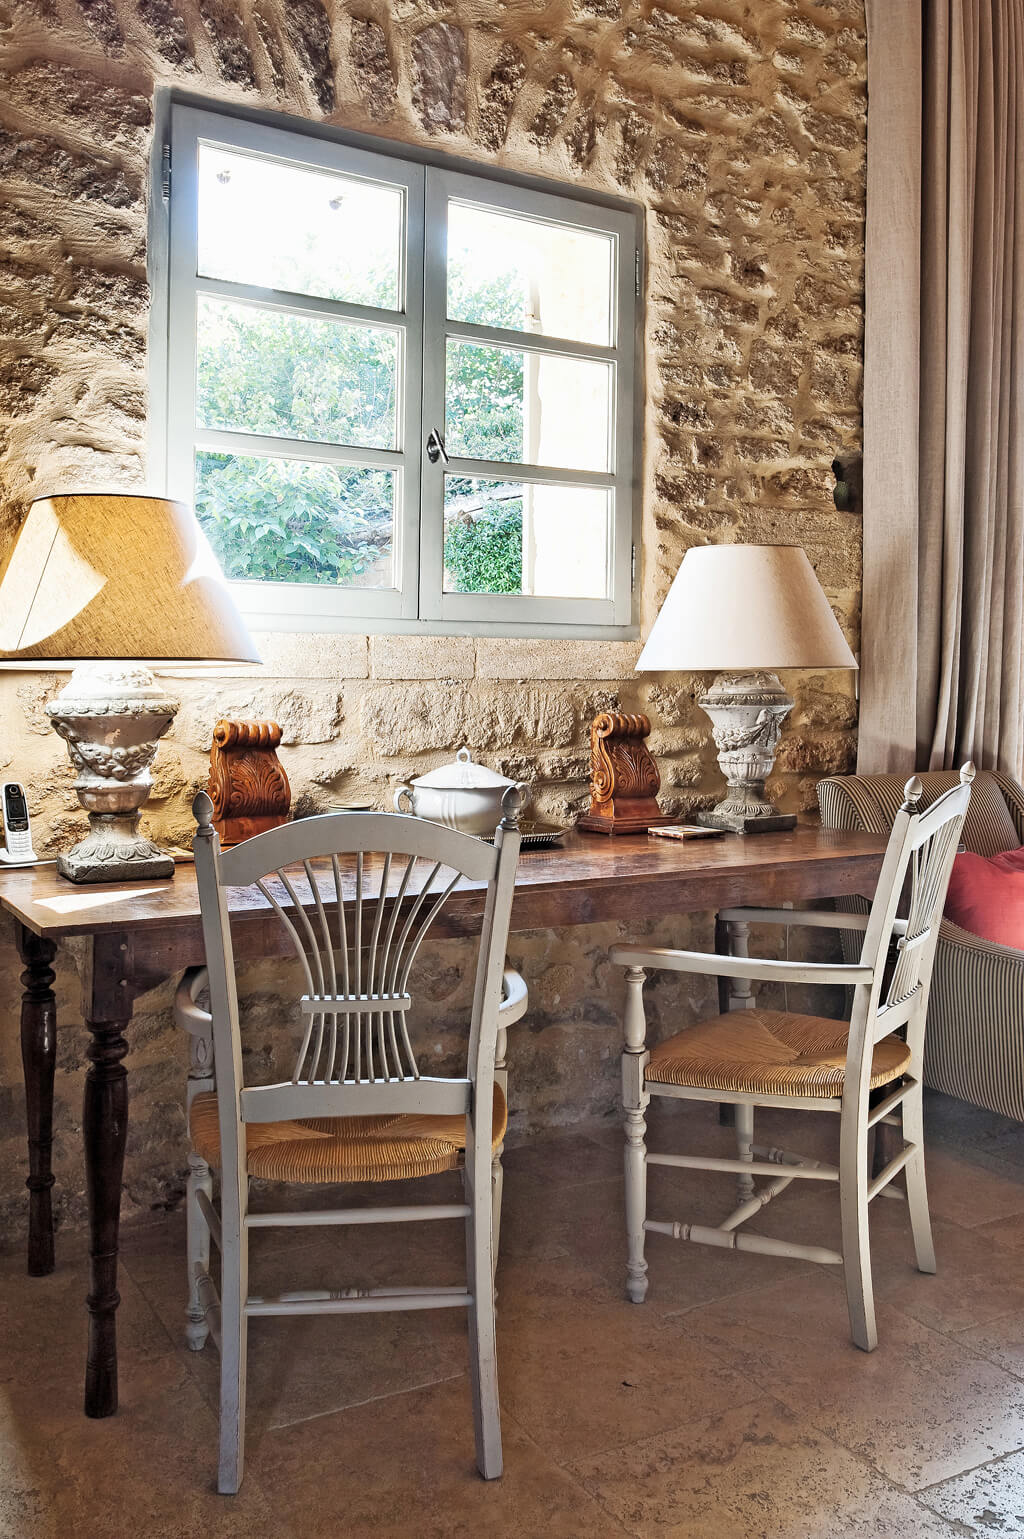 A beautiful French fantasy awaits with rustic elegance in the South of France! House Tour: Inspiring Provence French Farmhouse will delight with images of French country Old World inspiration. #frenchcountry #provence #frenchfarmhouse #housetour #interiordesign #rusticdecor